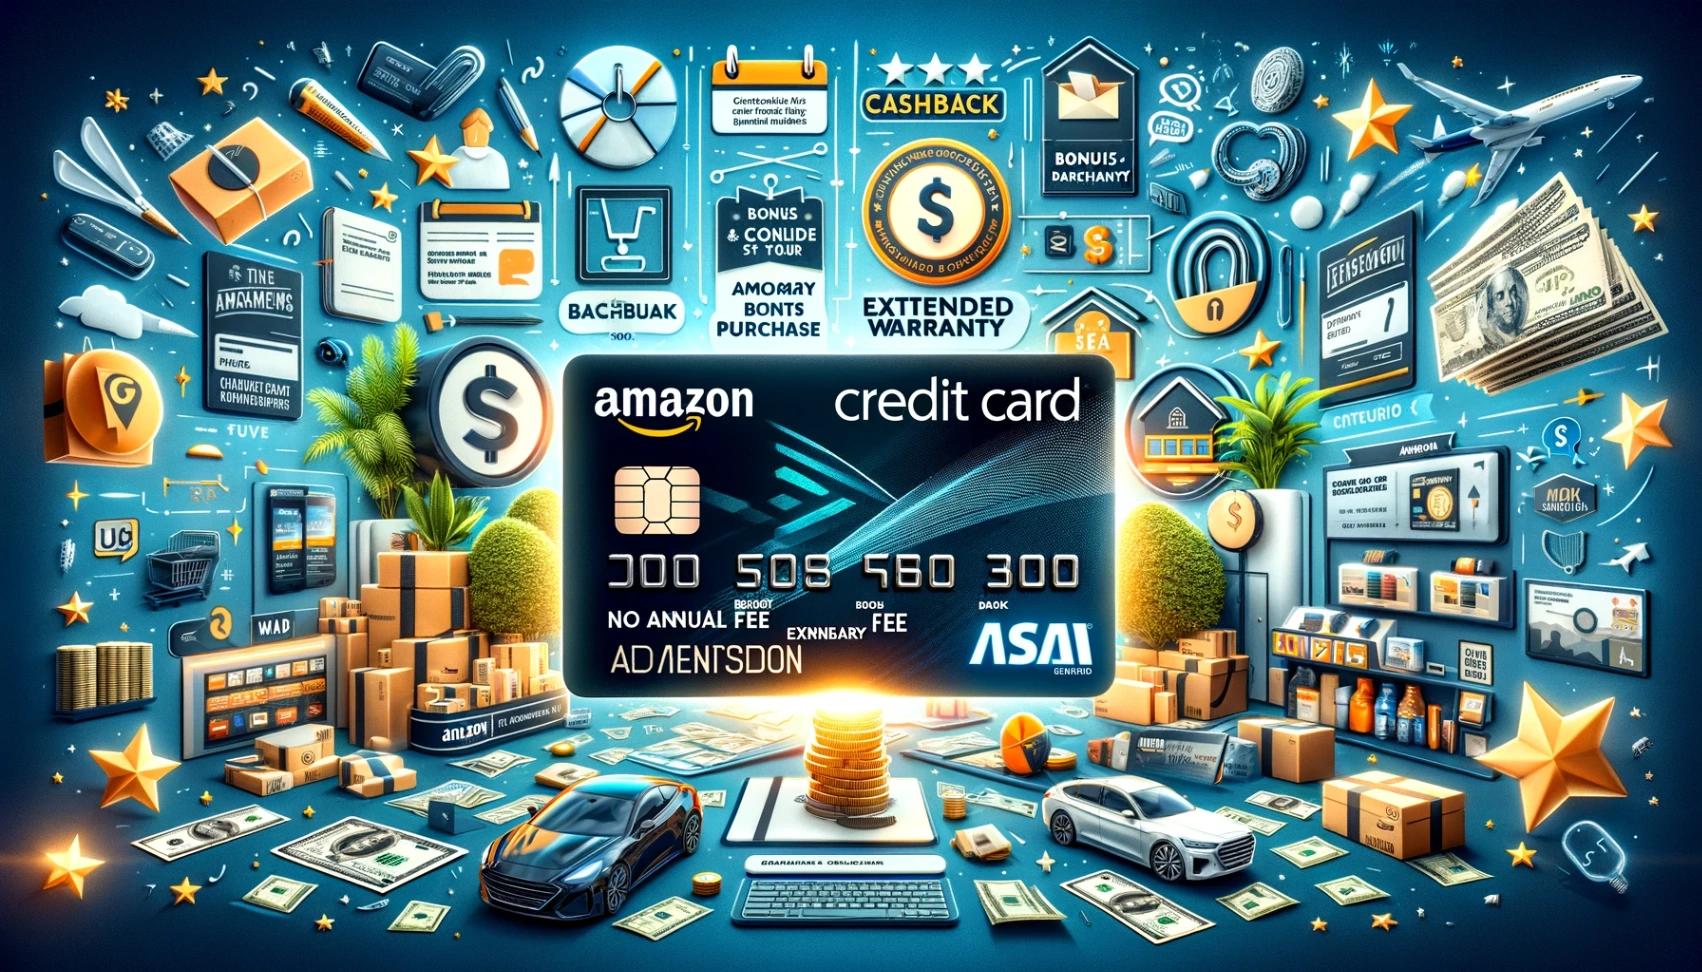 Amazon Credit Card: Apply Today for Exclusive Benefits